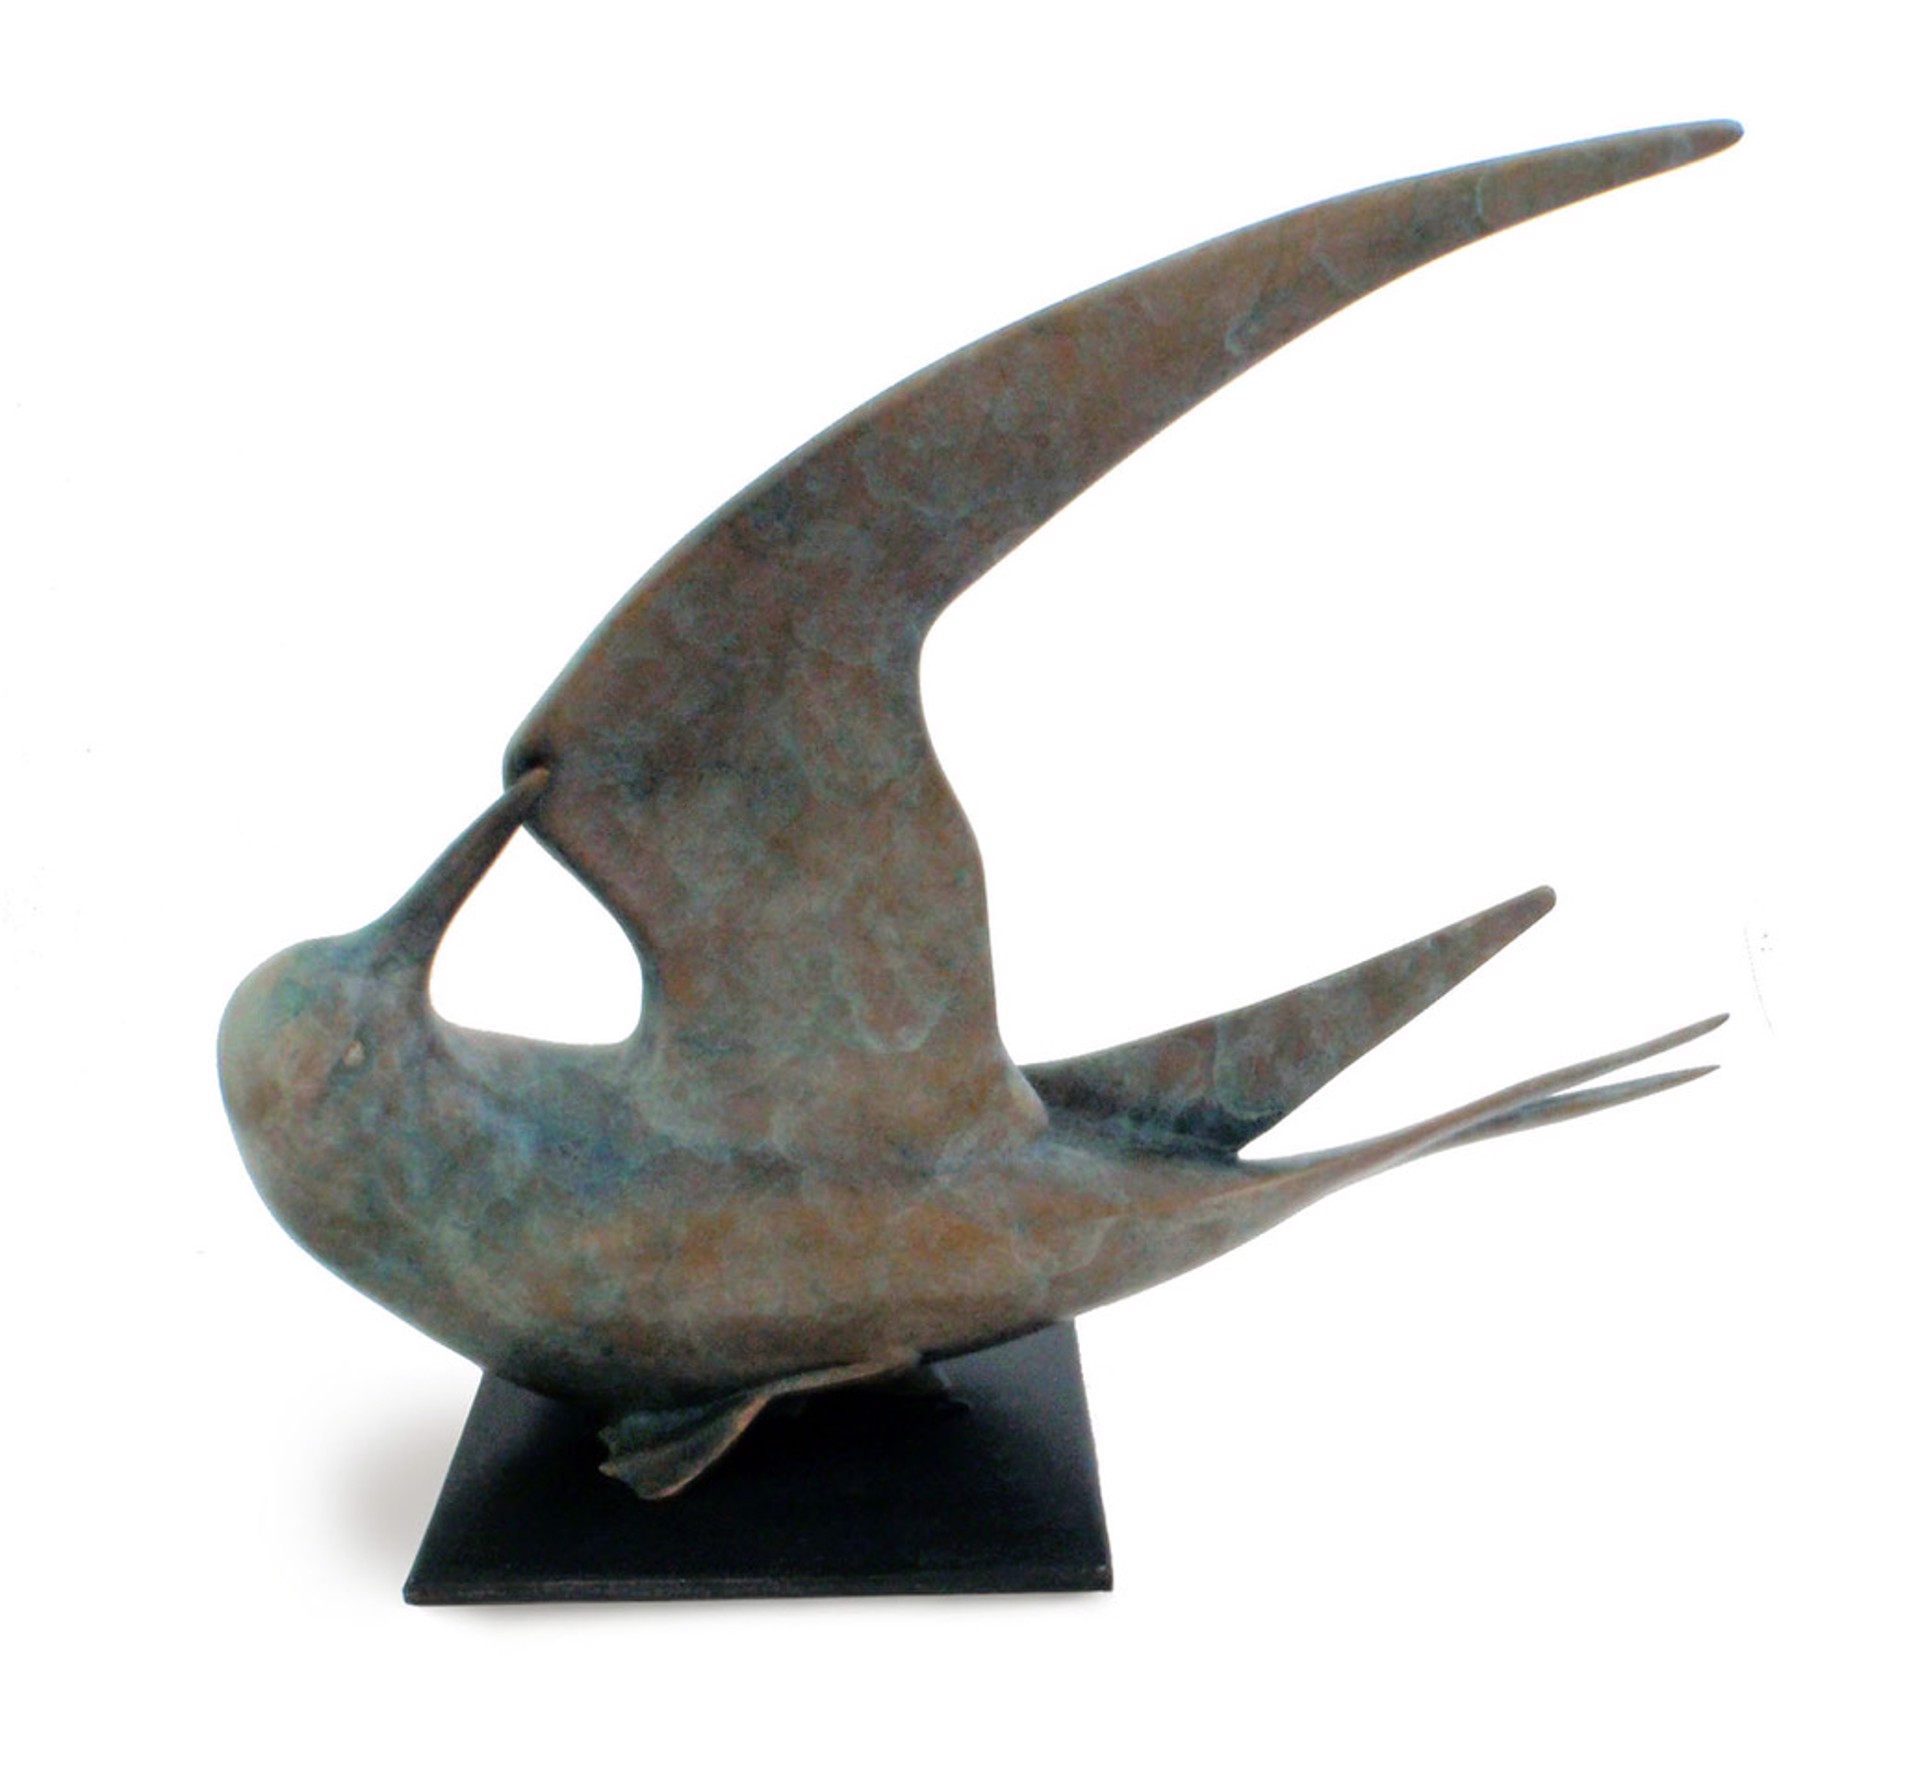 Limited Edition Bronze Sculpture Of A Tern Preening Its Wing With A Contemporary Blue Patina, By Kristine Taylor